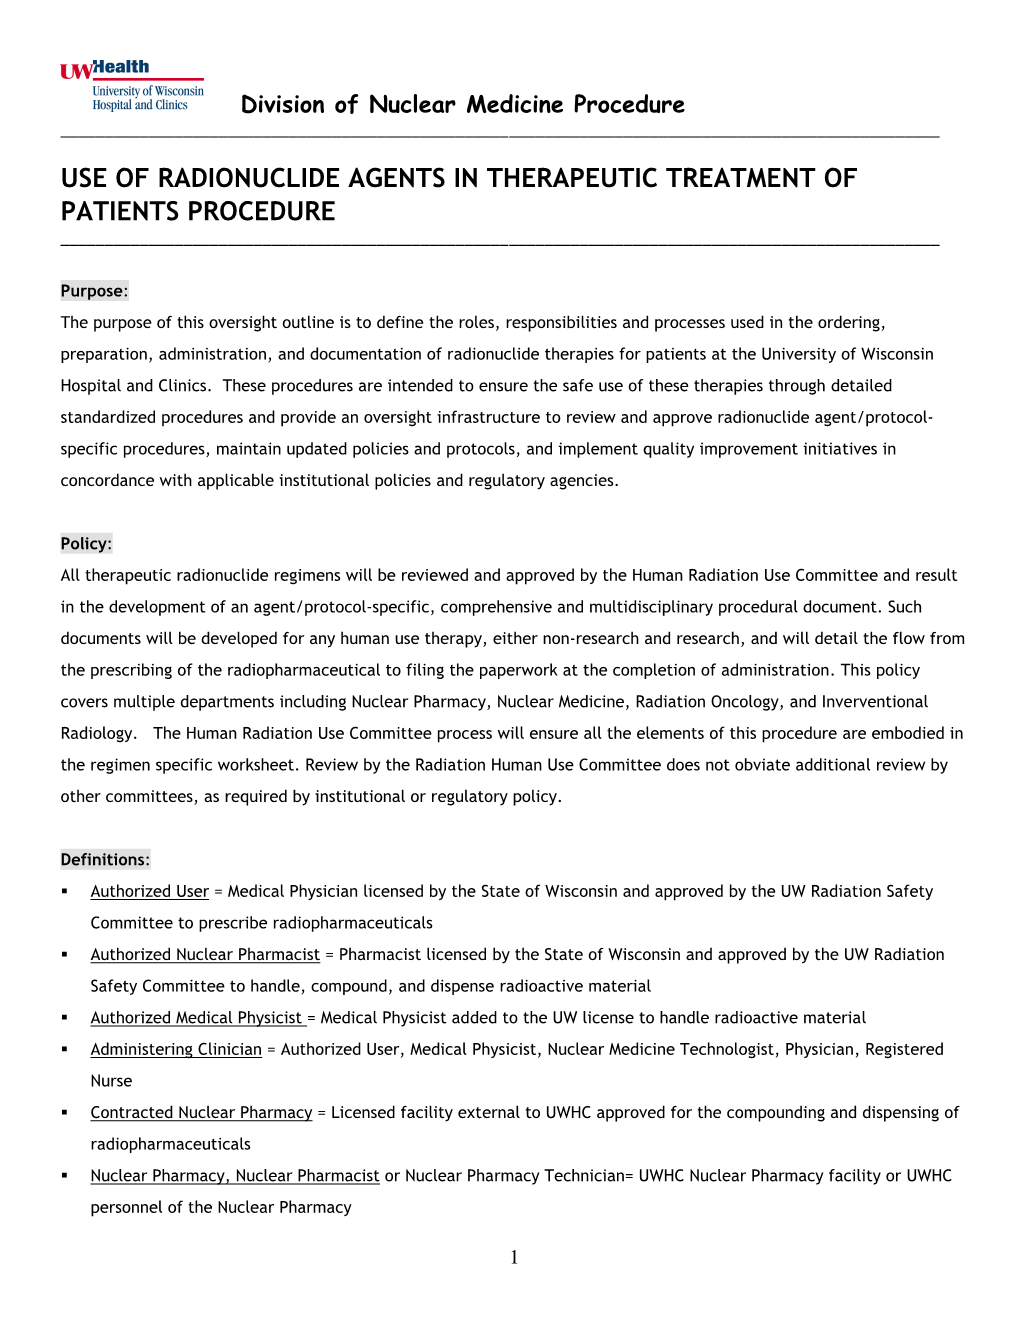 Use of Radionuclide Agents in Therapeutic Treatment of Patients Procedure ______